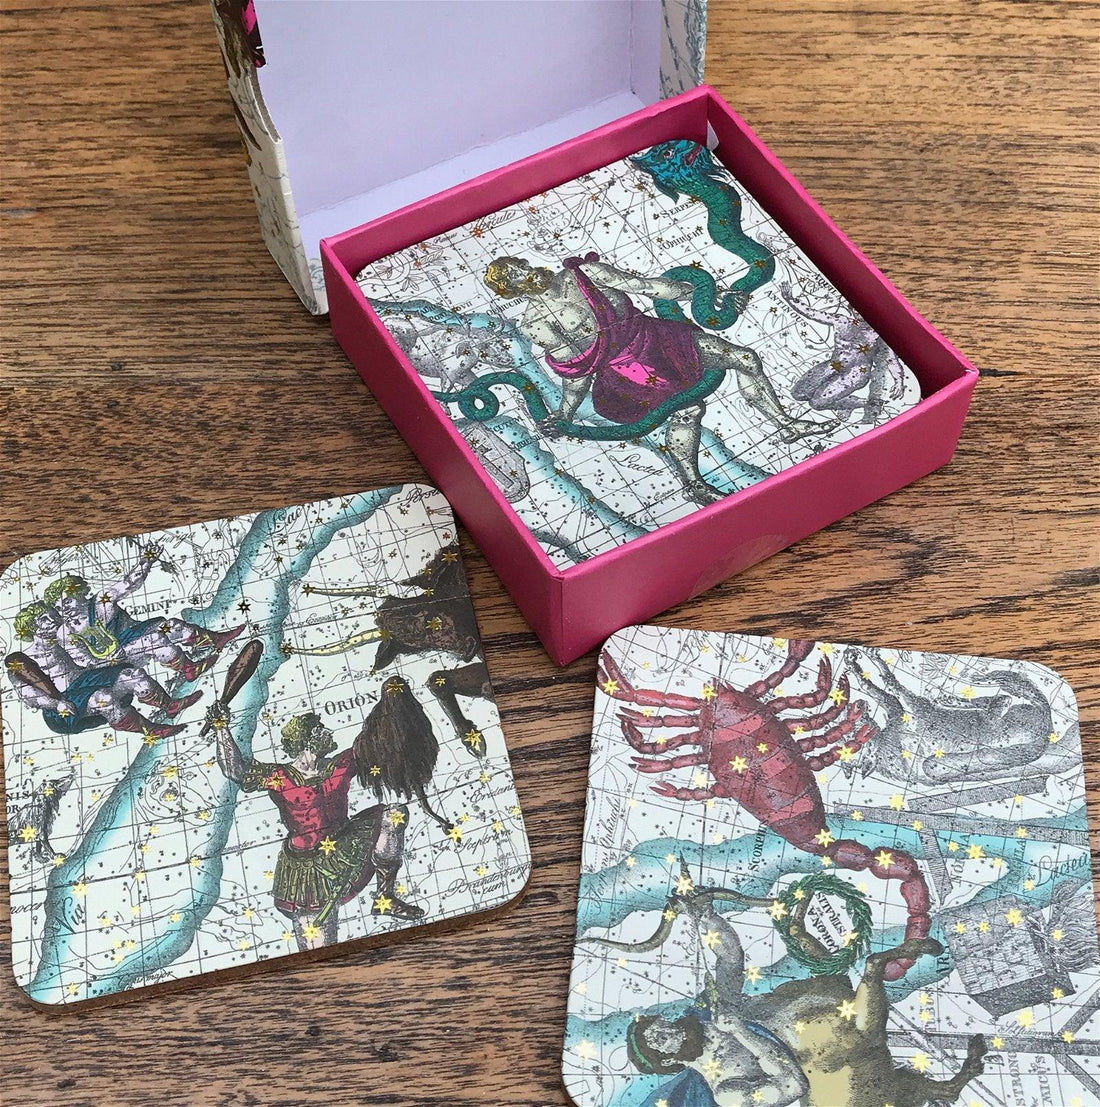 Pack Of Six Astrology Coasters In Gift Box - £12.99 - Coasters & Placemats 